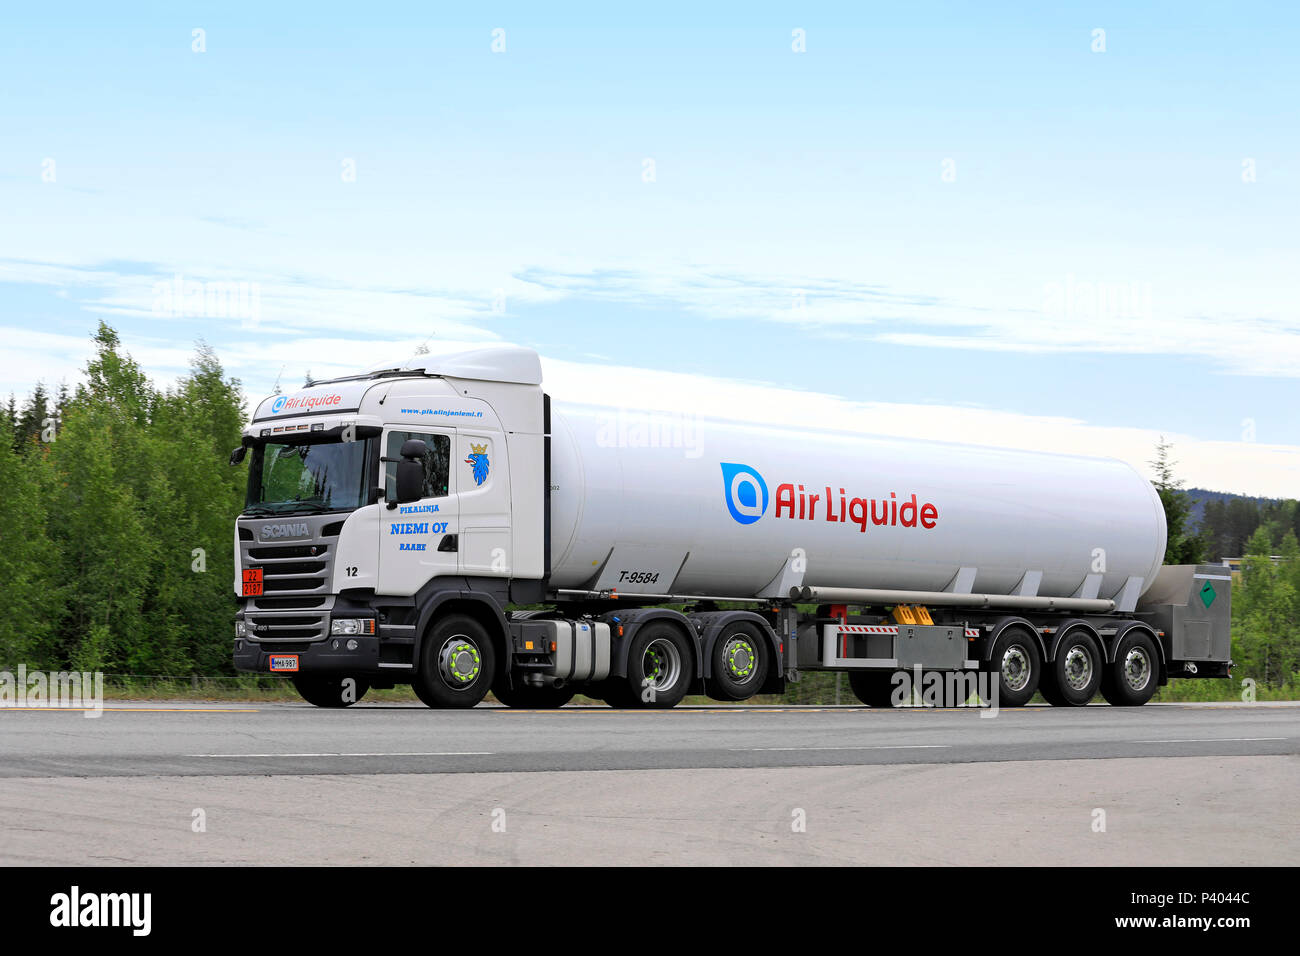 White Scania R490 semi tanker for Air Liquide ADR transport of Carbon dioxide refrigerated liquid on road. Hirvaskangas, Finland - June 15, 2018. Stock Photo